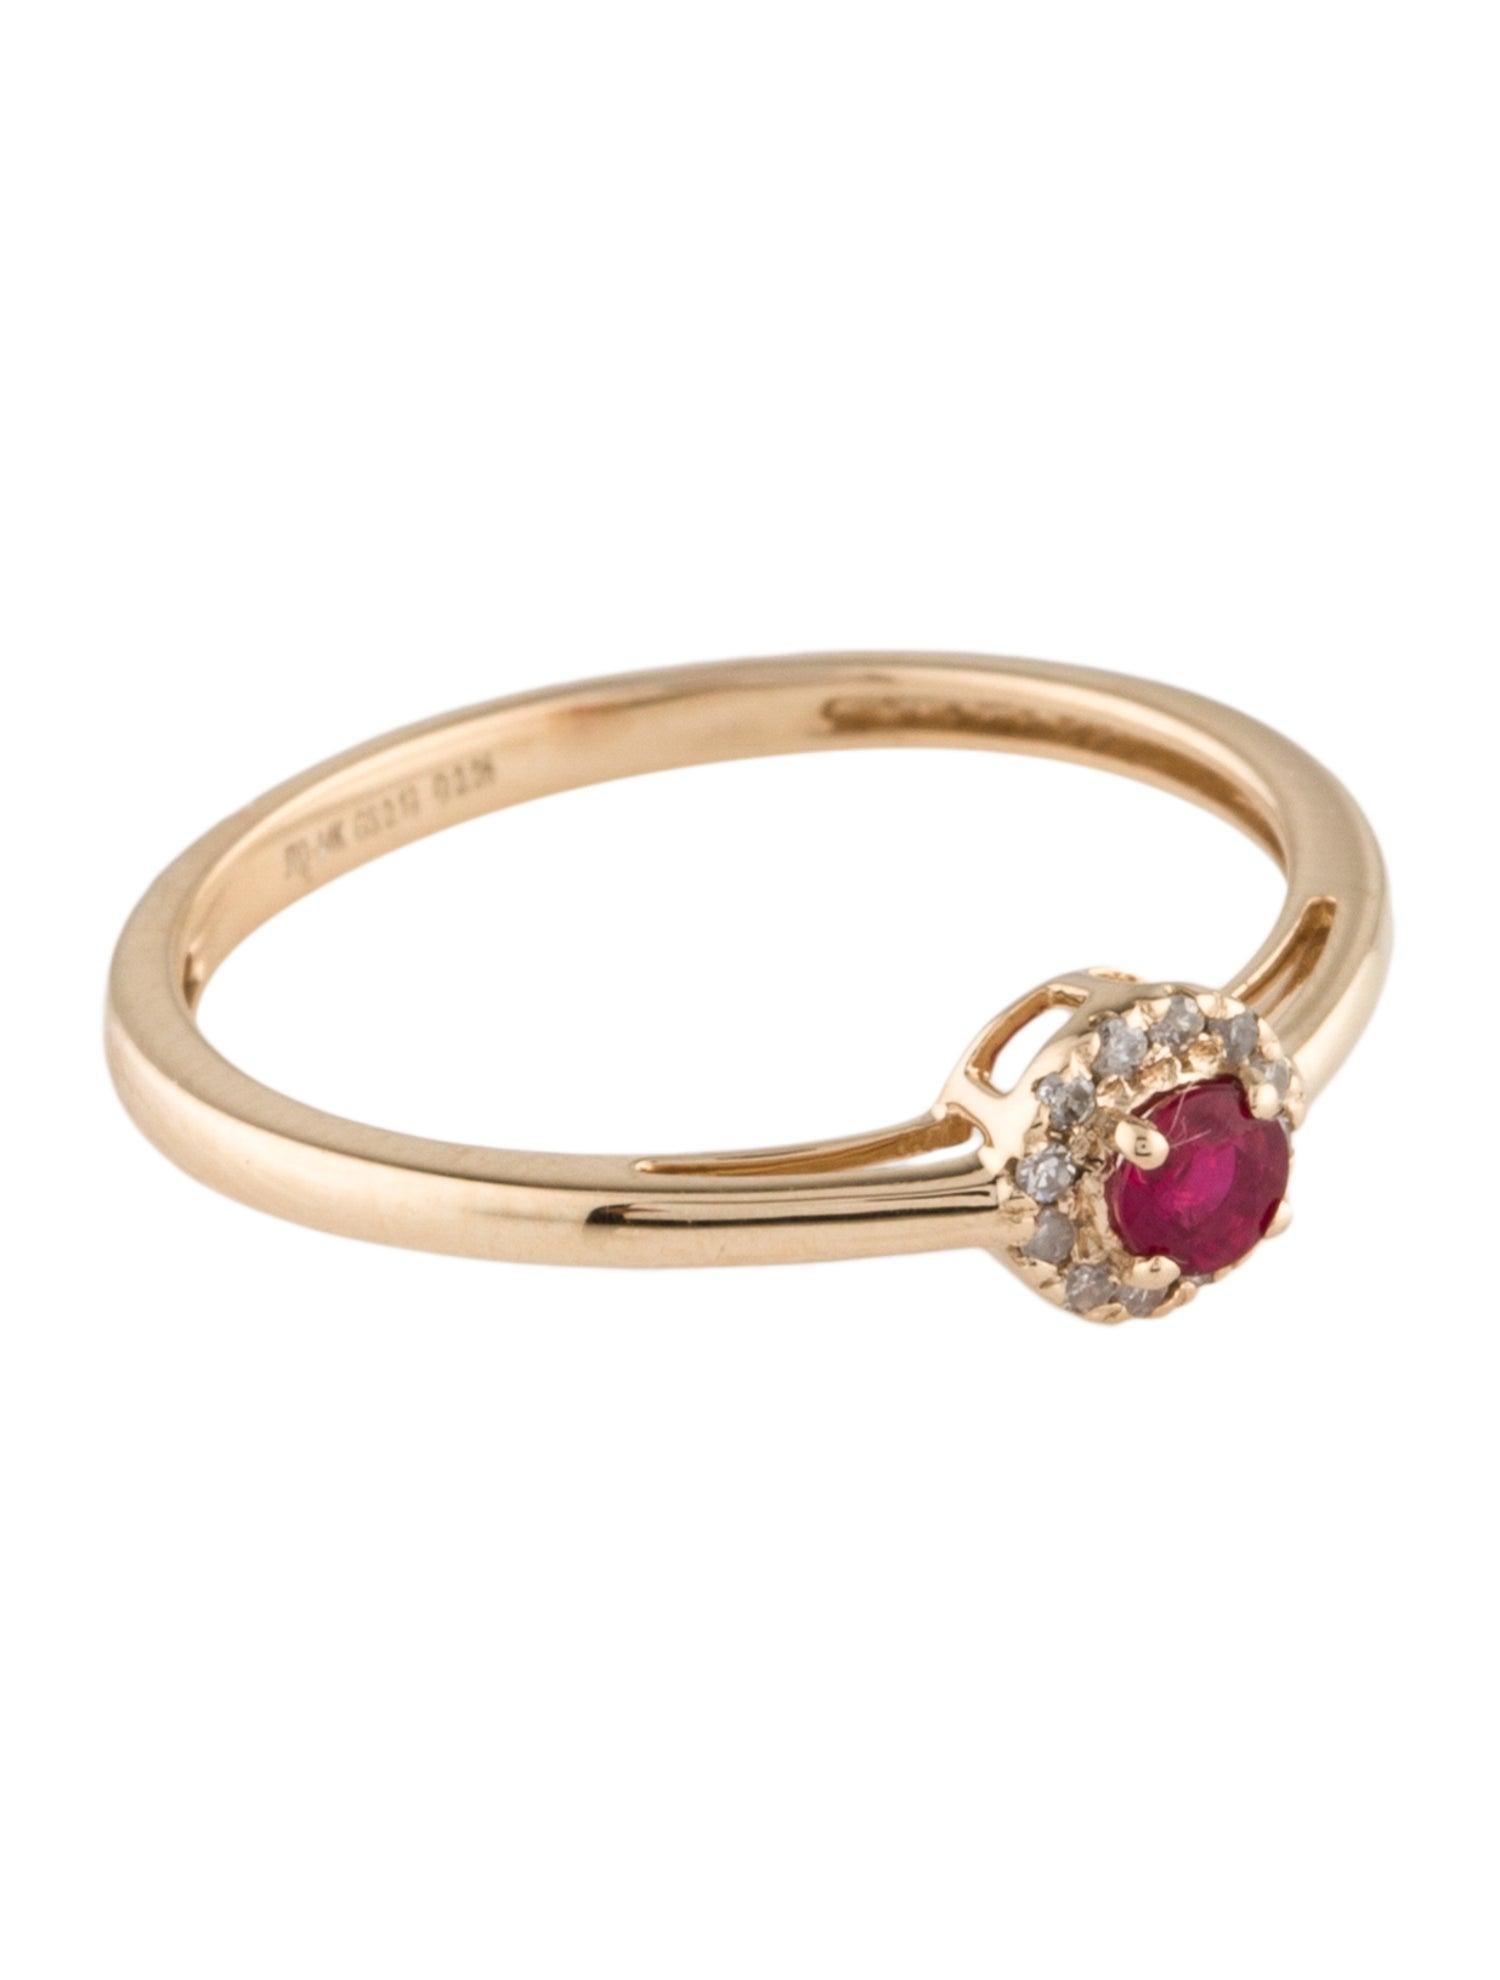 Introducing a delicate masterpiece, our 14K Yellow Gold Thin Cocktail Ring, gracefully featuring a 0.14 Carat Round Modified Brilliant Ruby at its heart, encapsulated by thirteen near colorless, single-cut diamonds totaling 0.06 carats. This